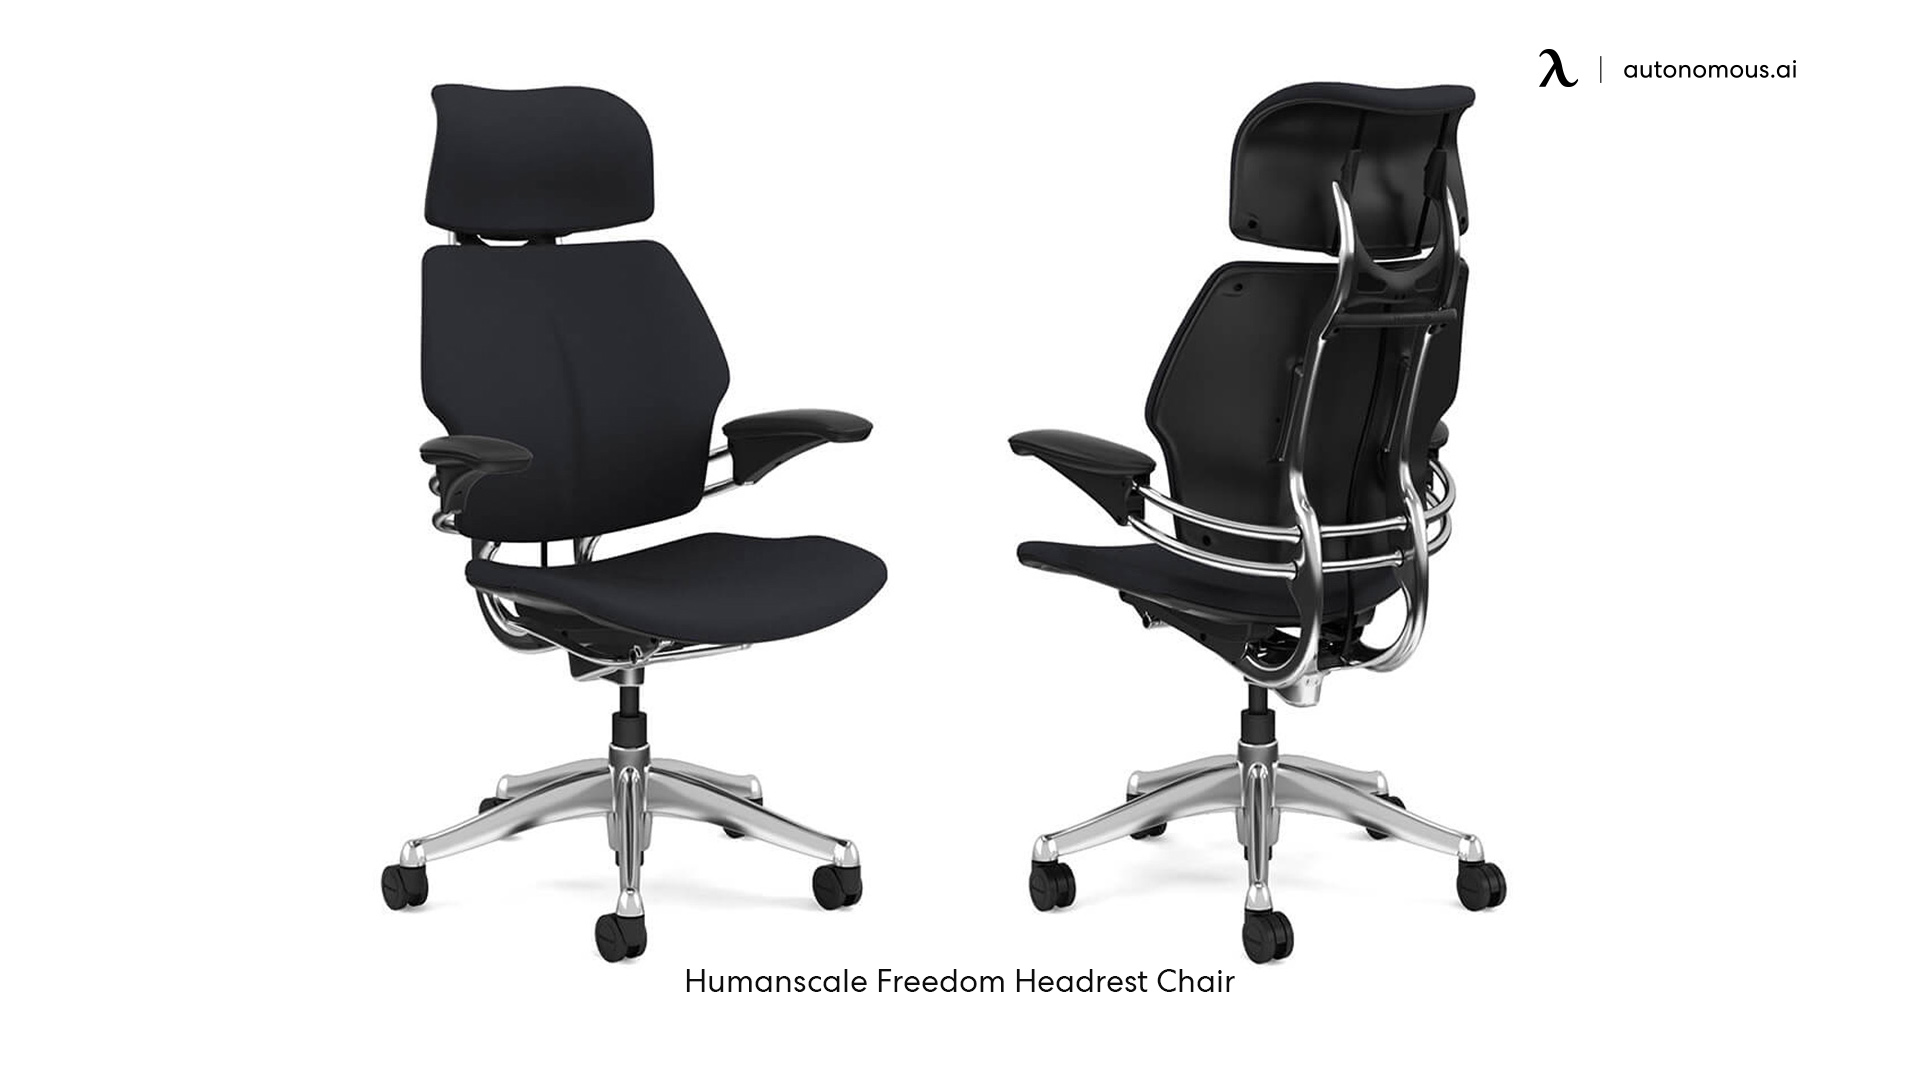 Human-scale Freedom Chair